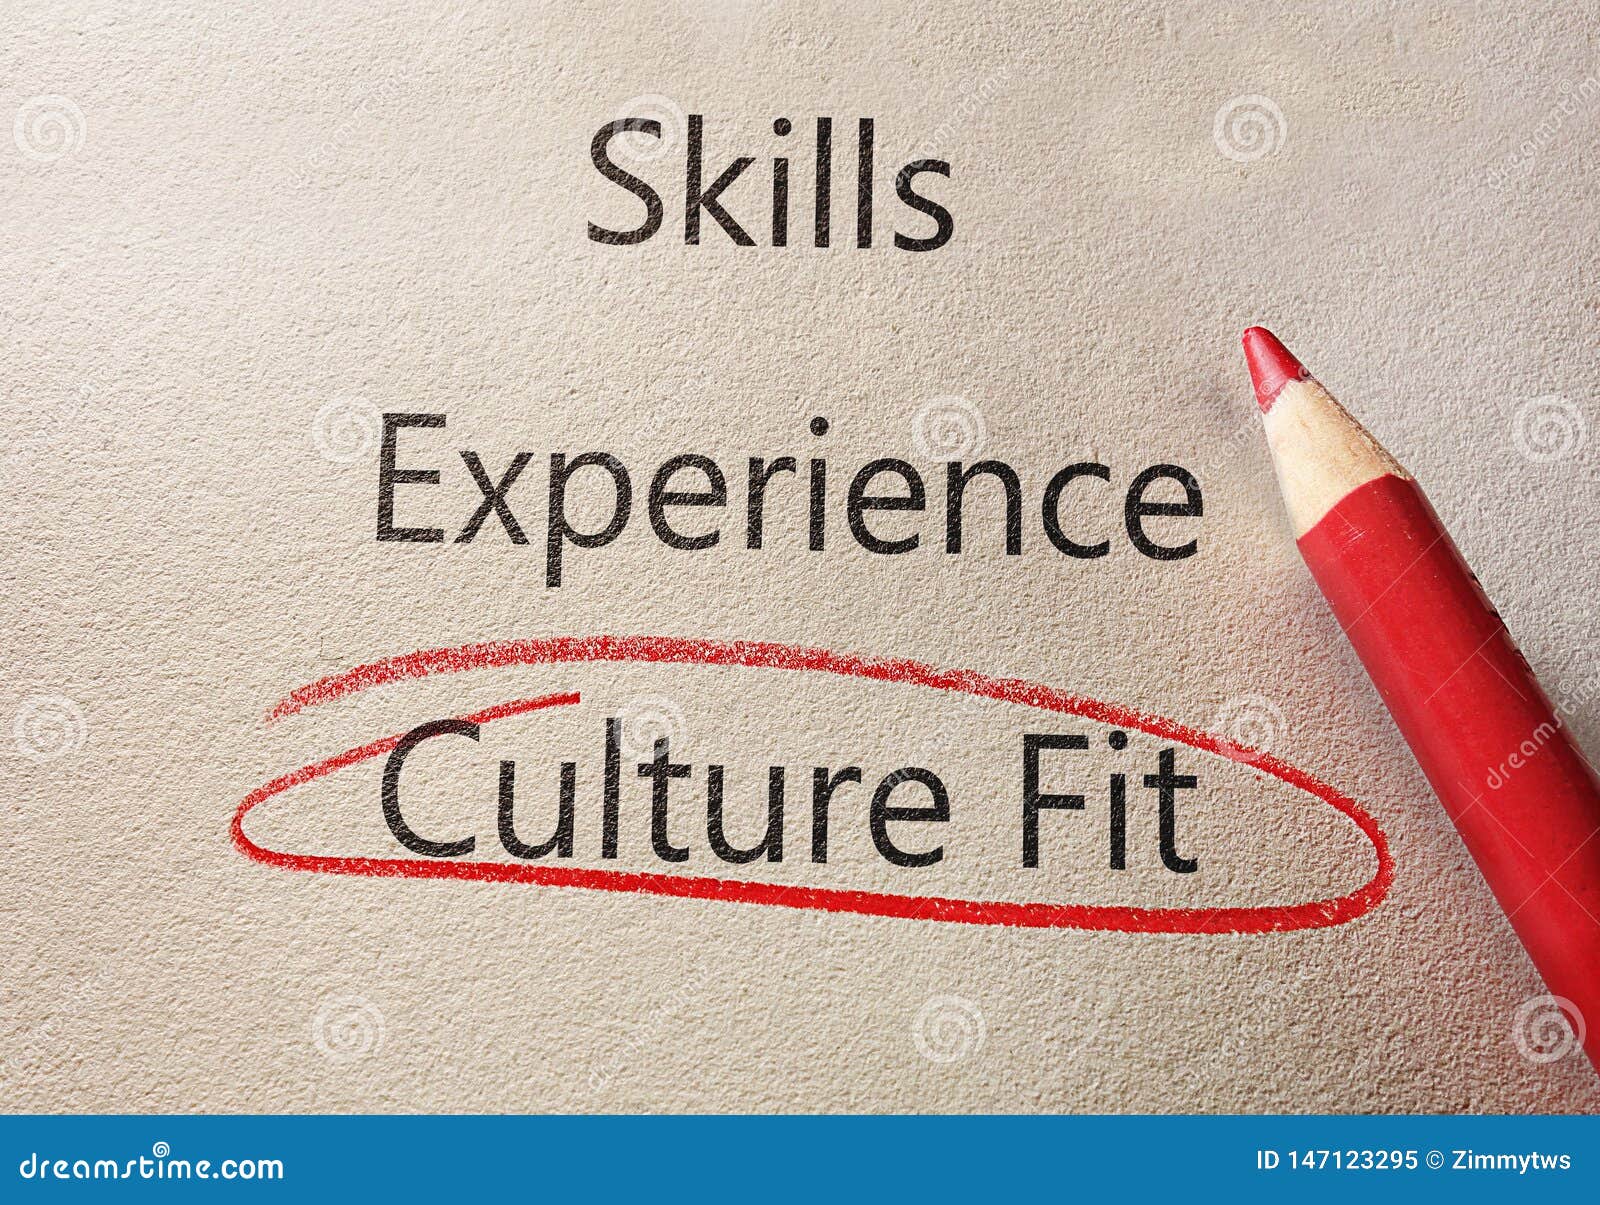 culture fit red circle